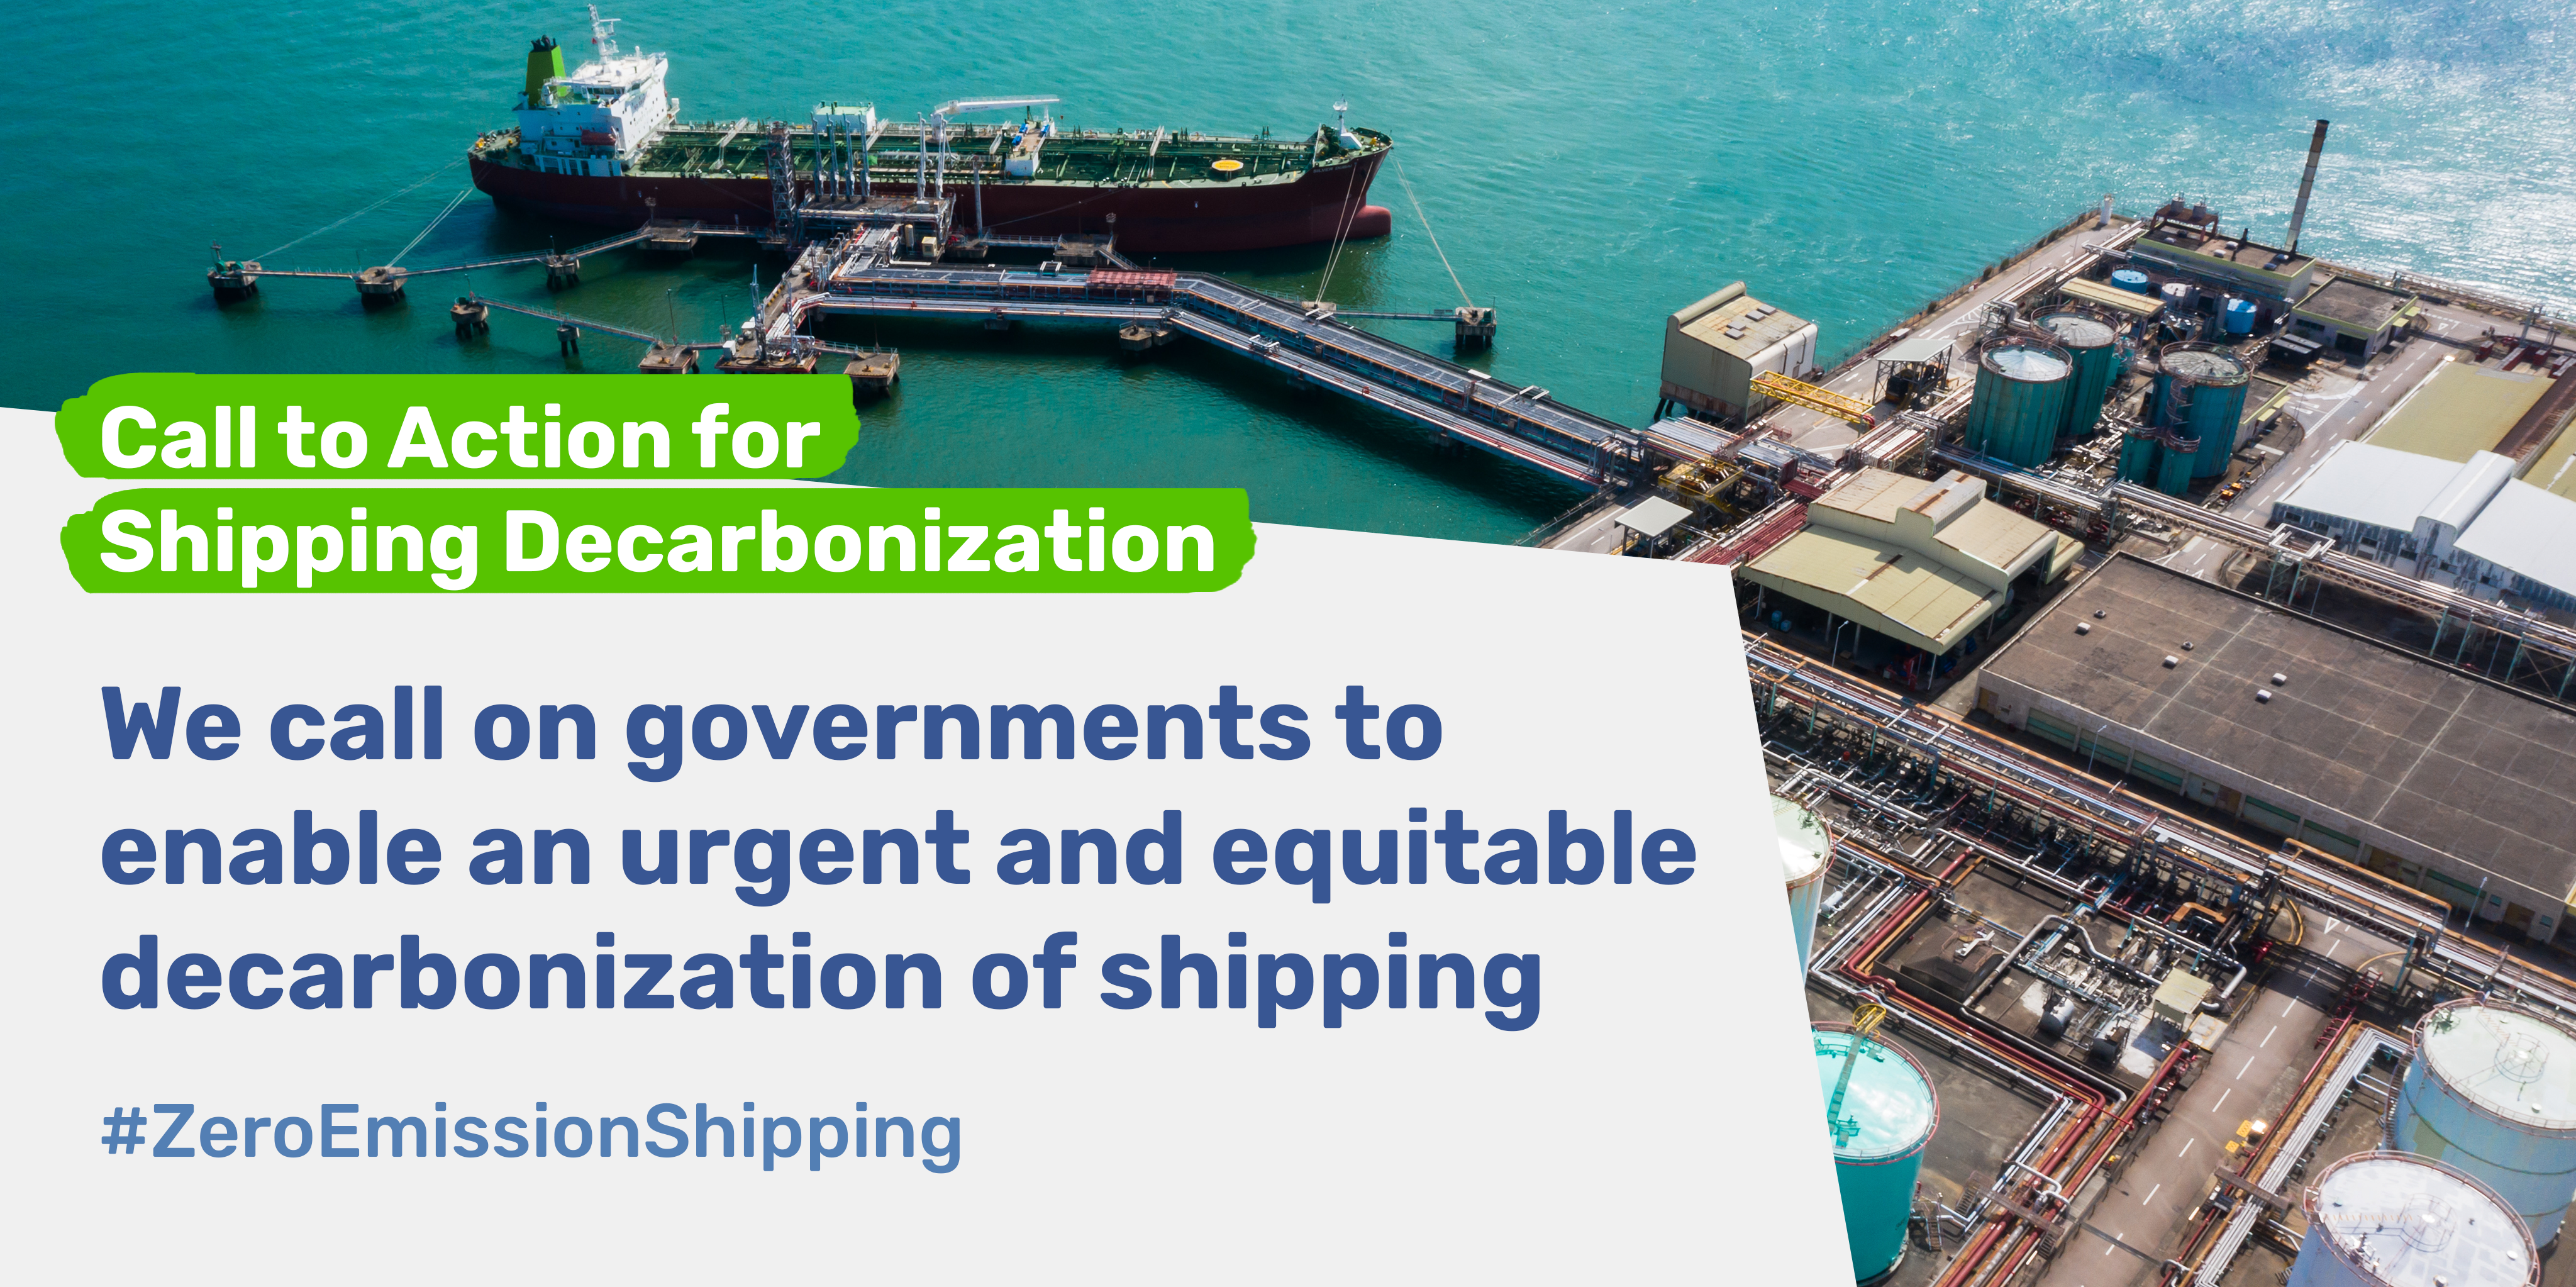  Call to Action for Shipping Decarbonization